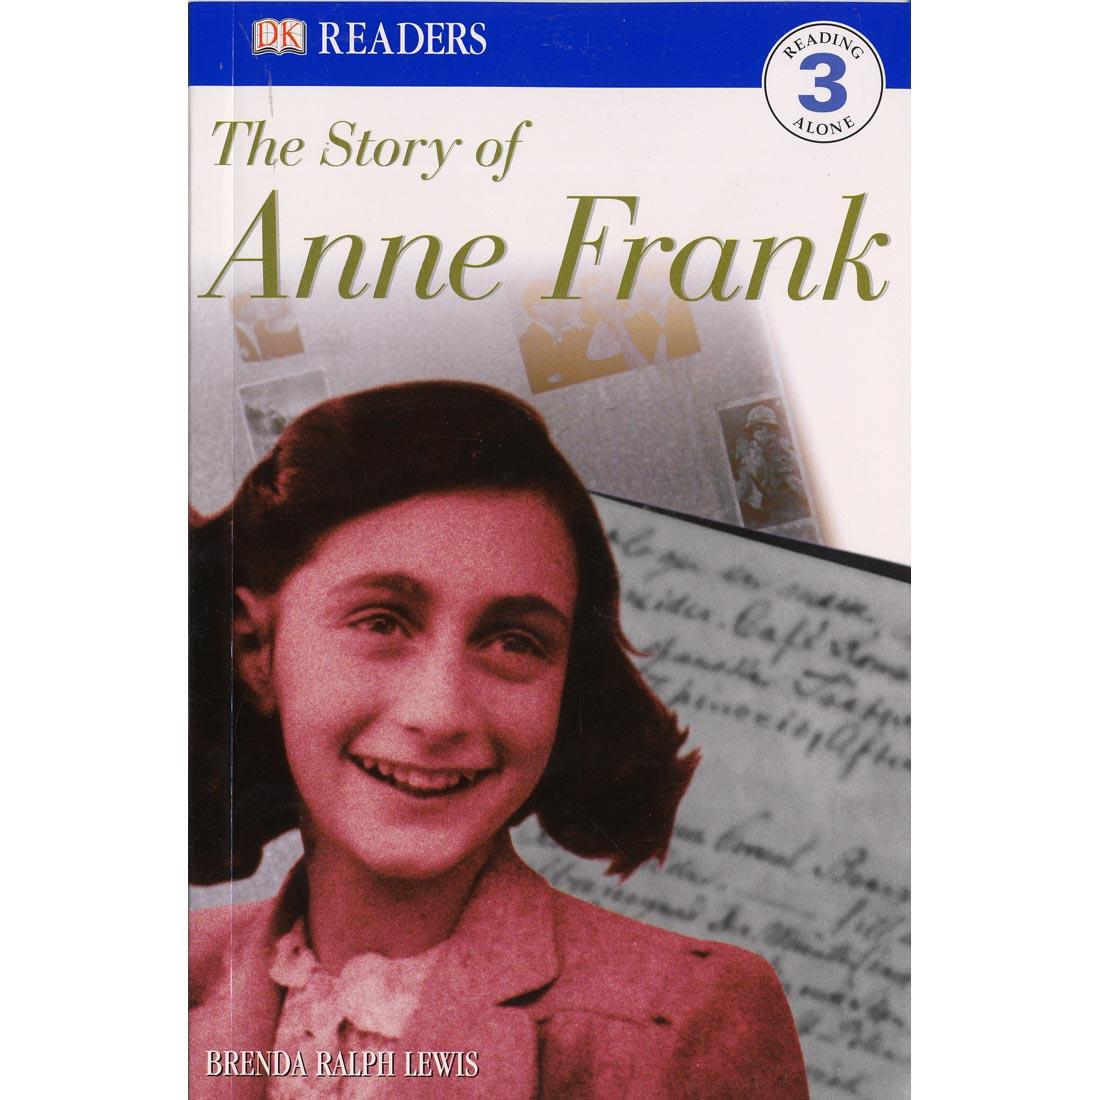 DK Readers Level 3 Book: The Story of Anne Frank